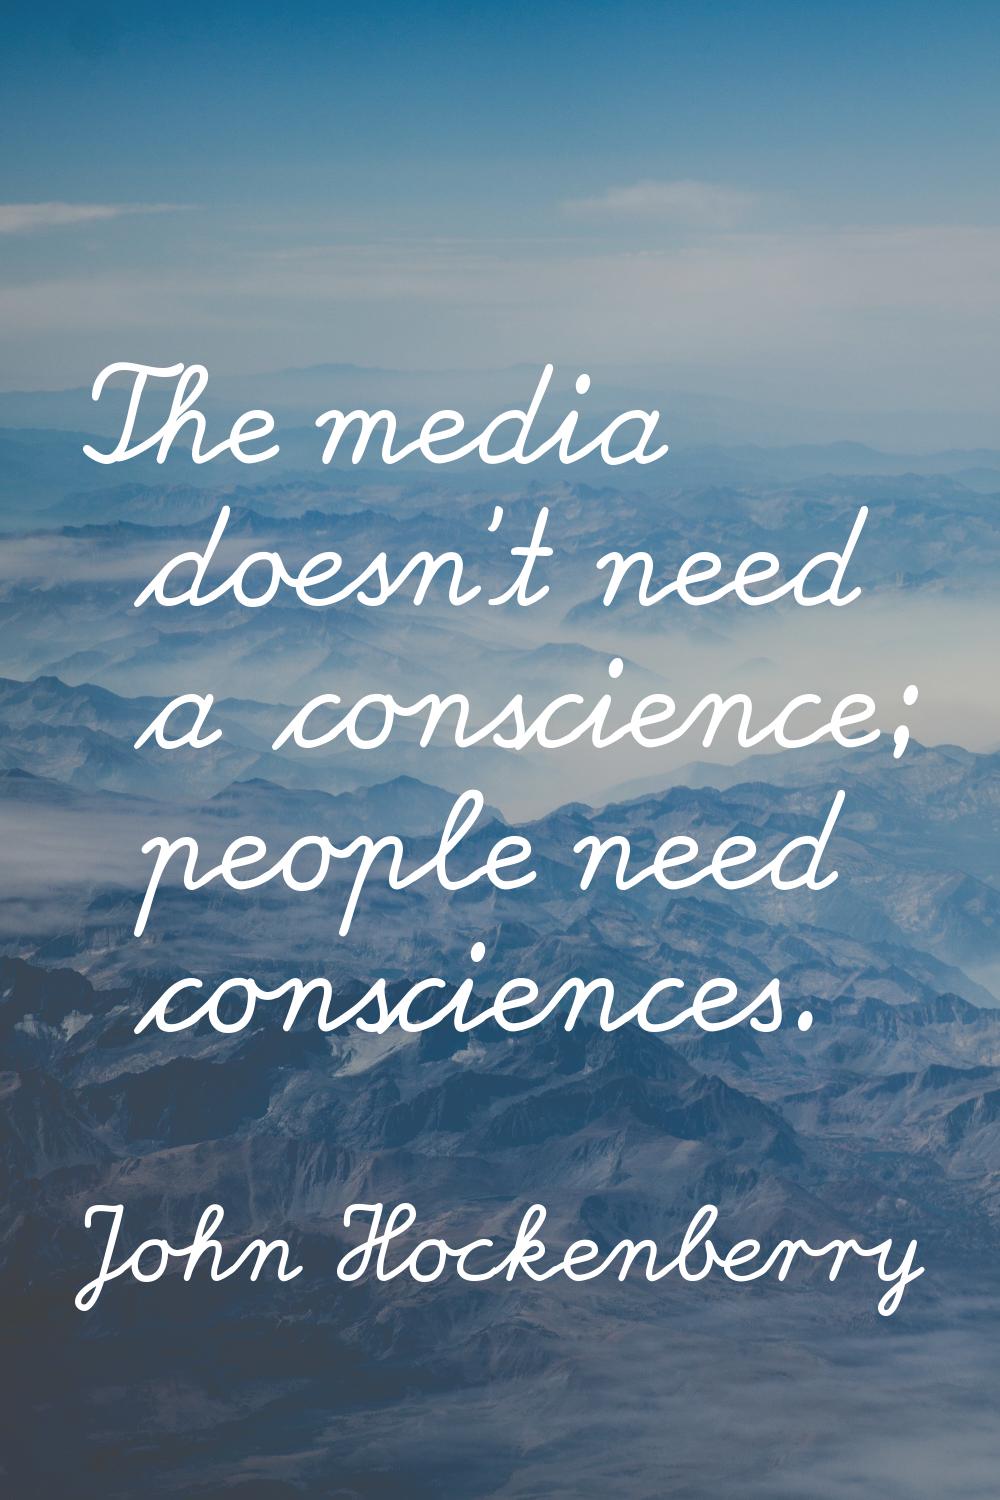 The media doesn't need a conscience; people need consciences.